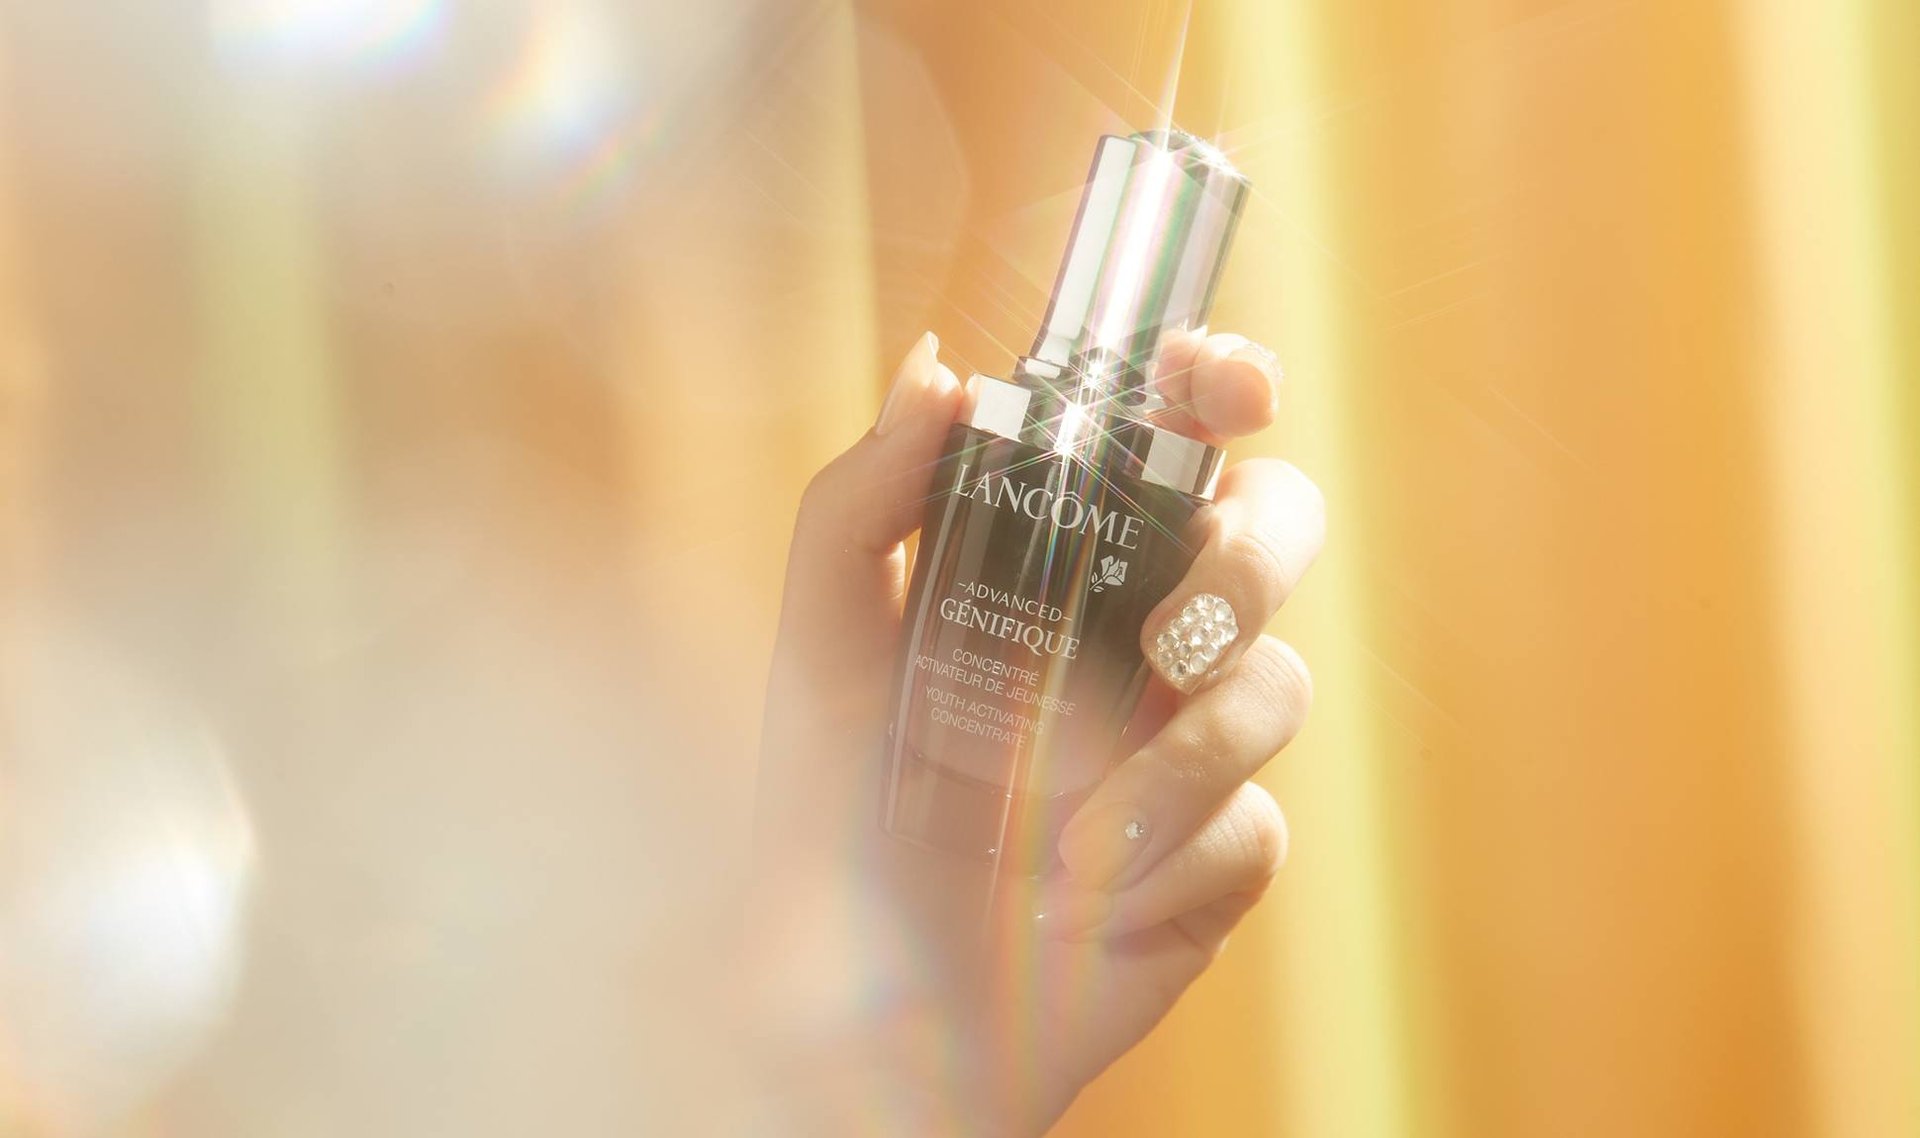 I Tried the Lancôme Advanced Génifique Face Serum and My Skin Has Never Looked Brighter